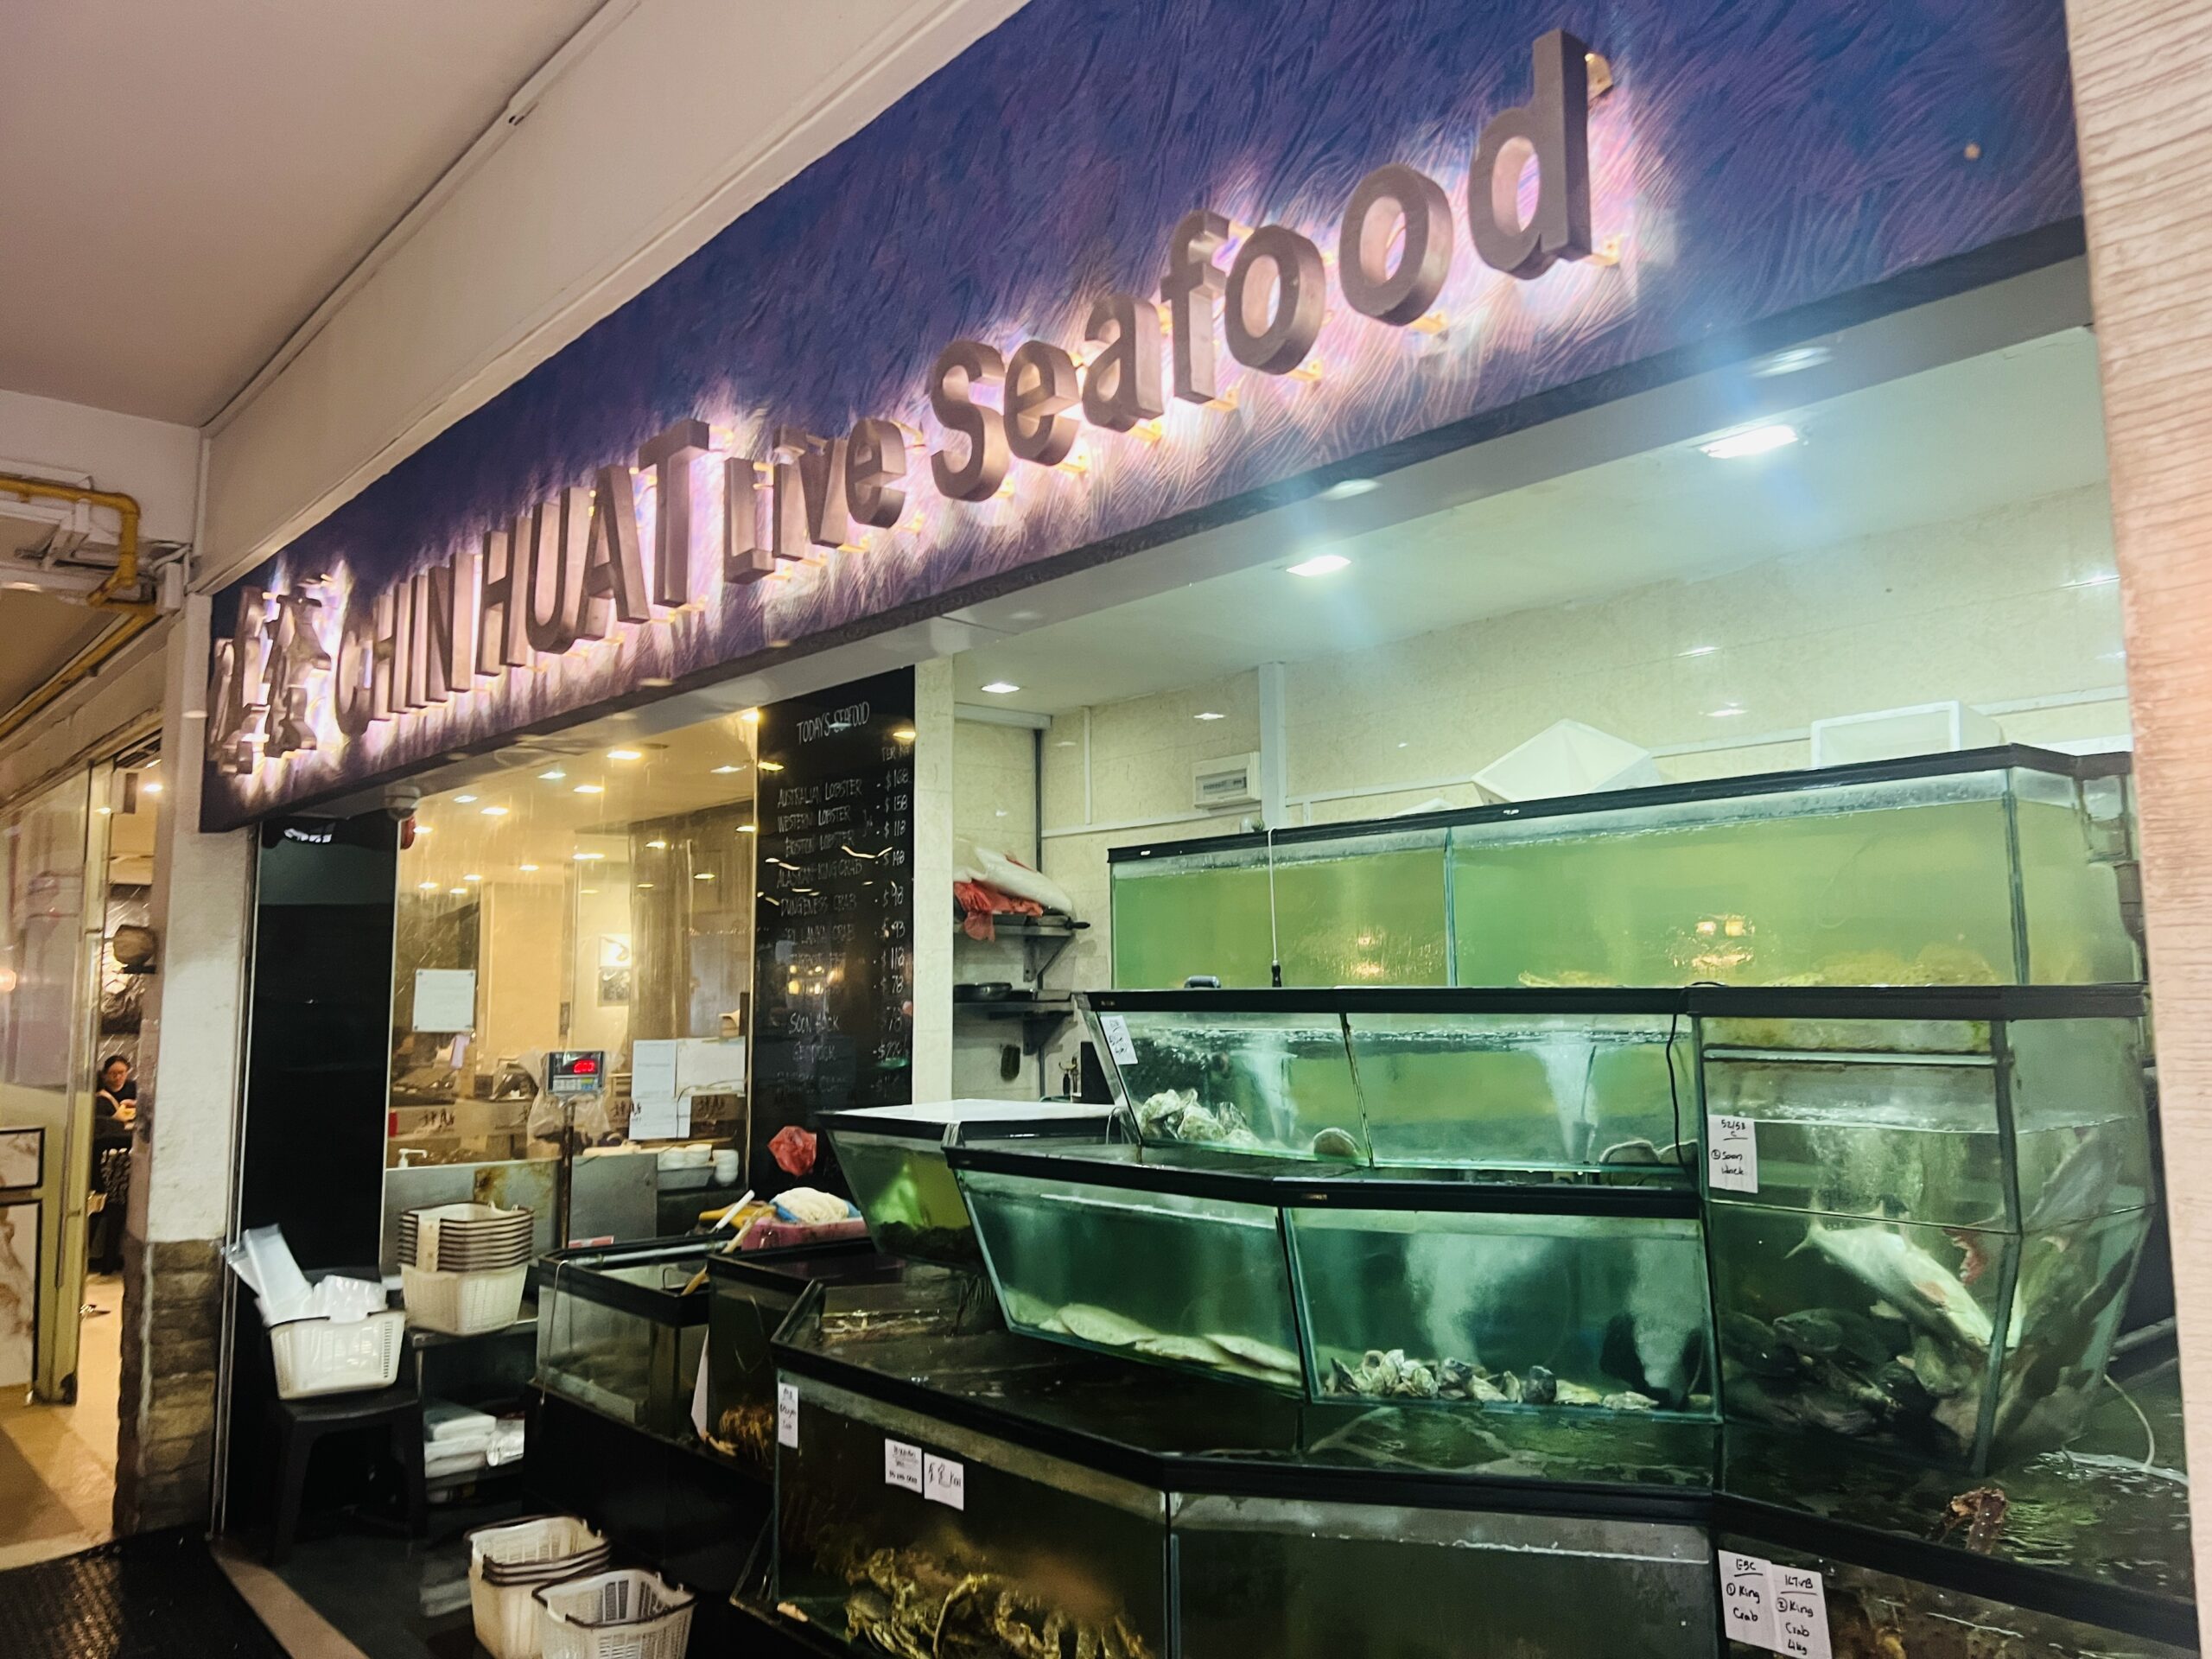 Chin Huat Live Seafood - Restaurant Front